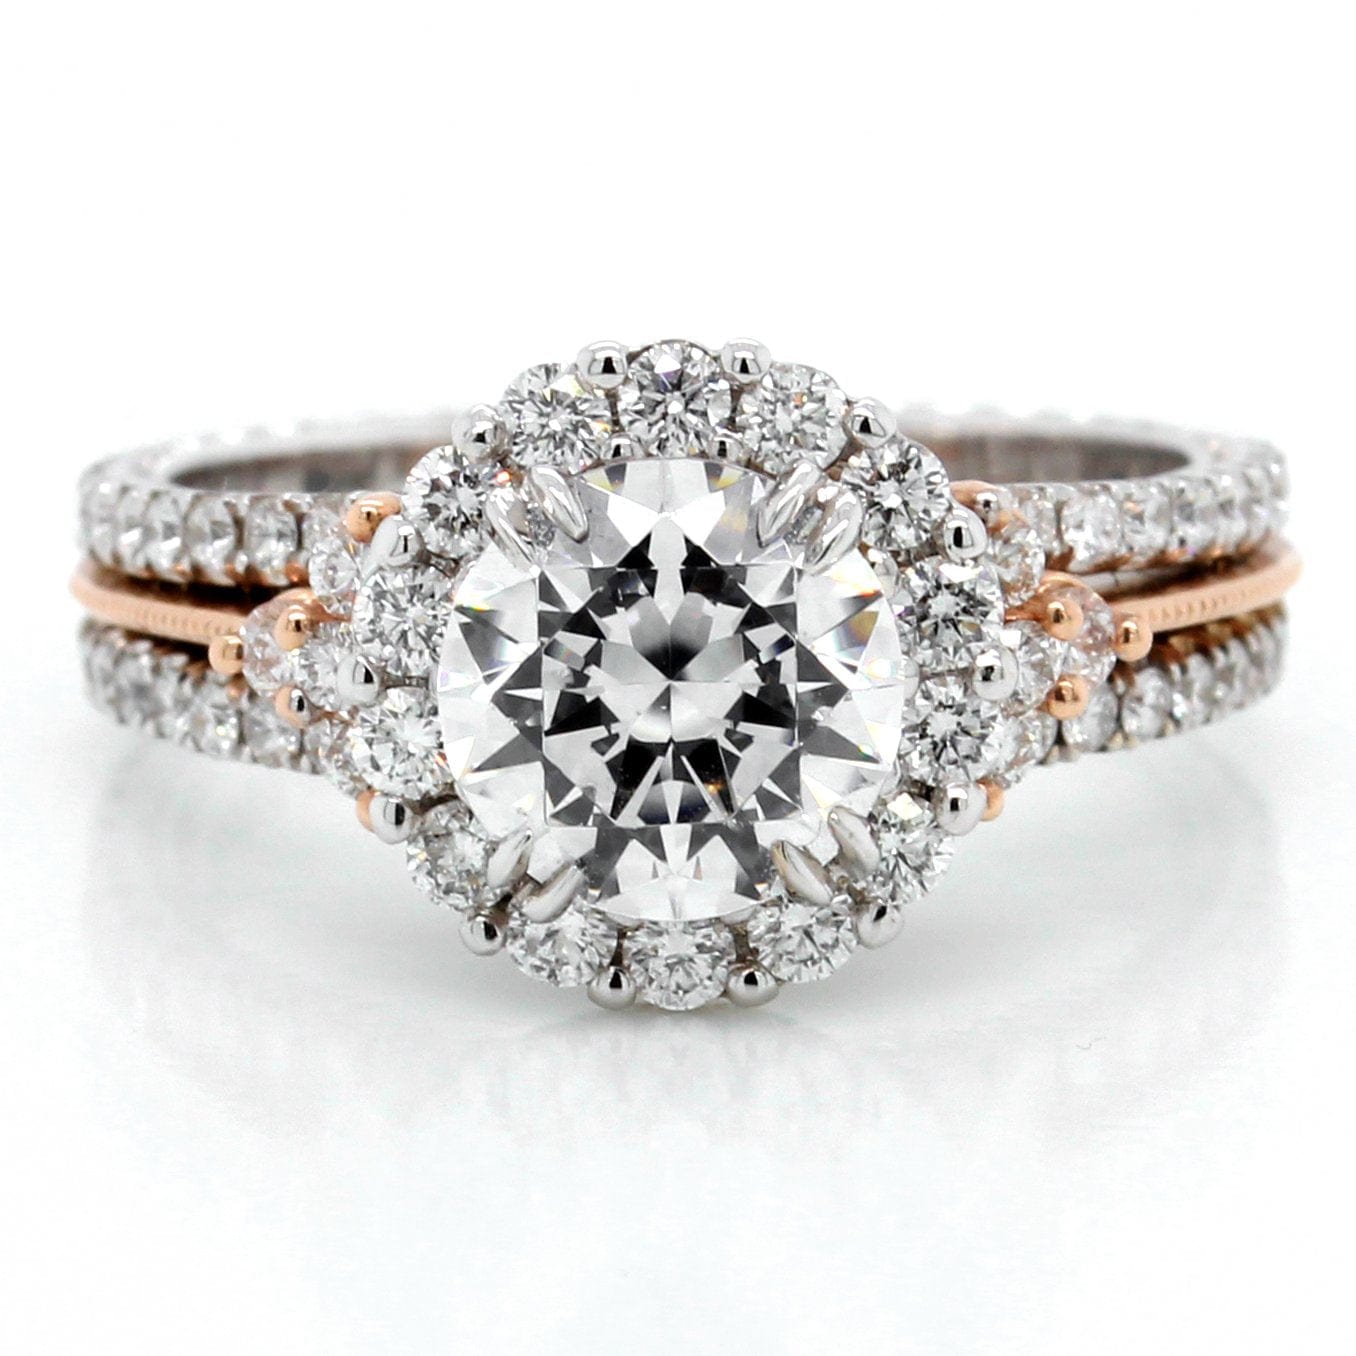 18K White Gold and 14K Rose Gold Tri-Shank Halo Engagement Ring